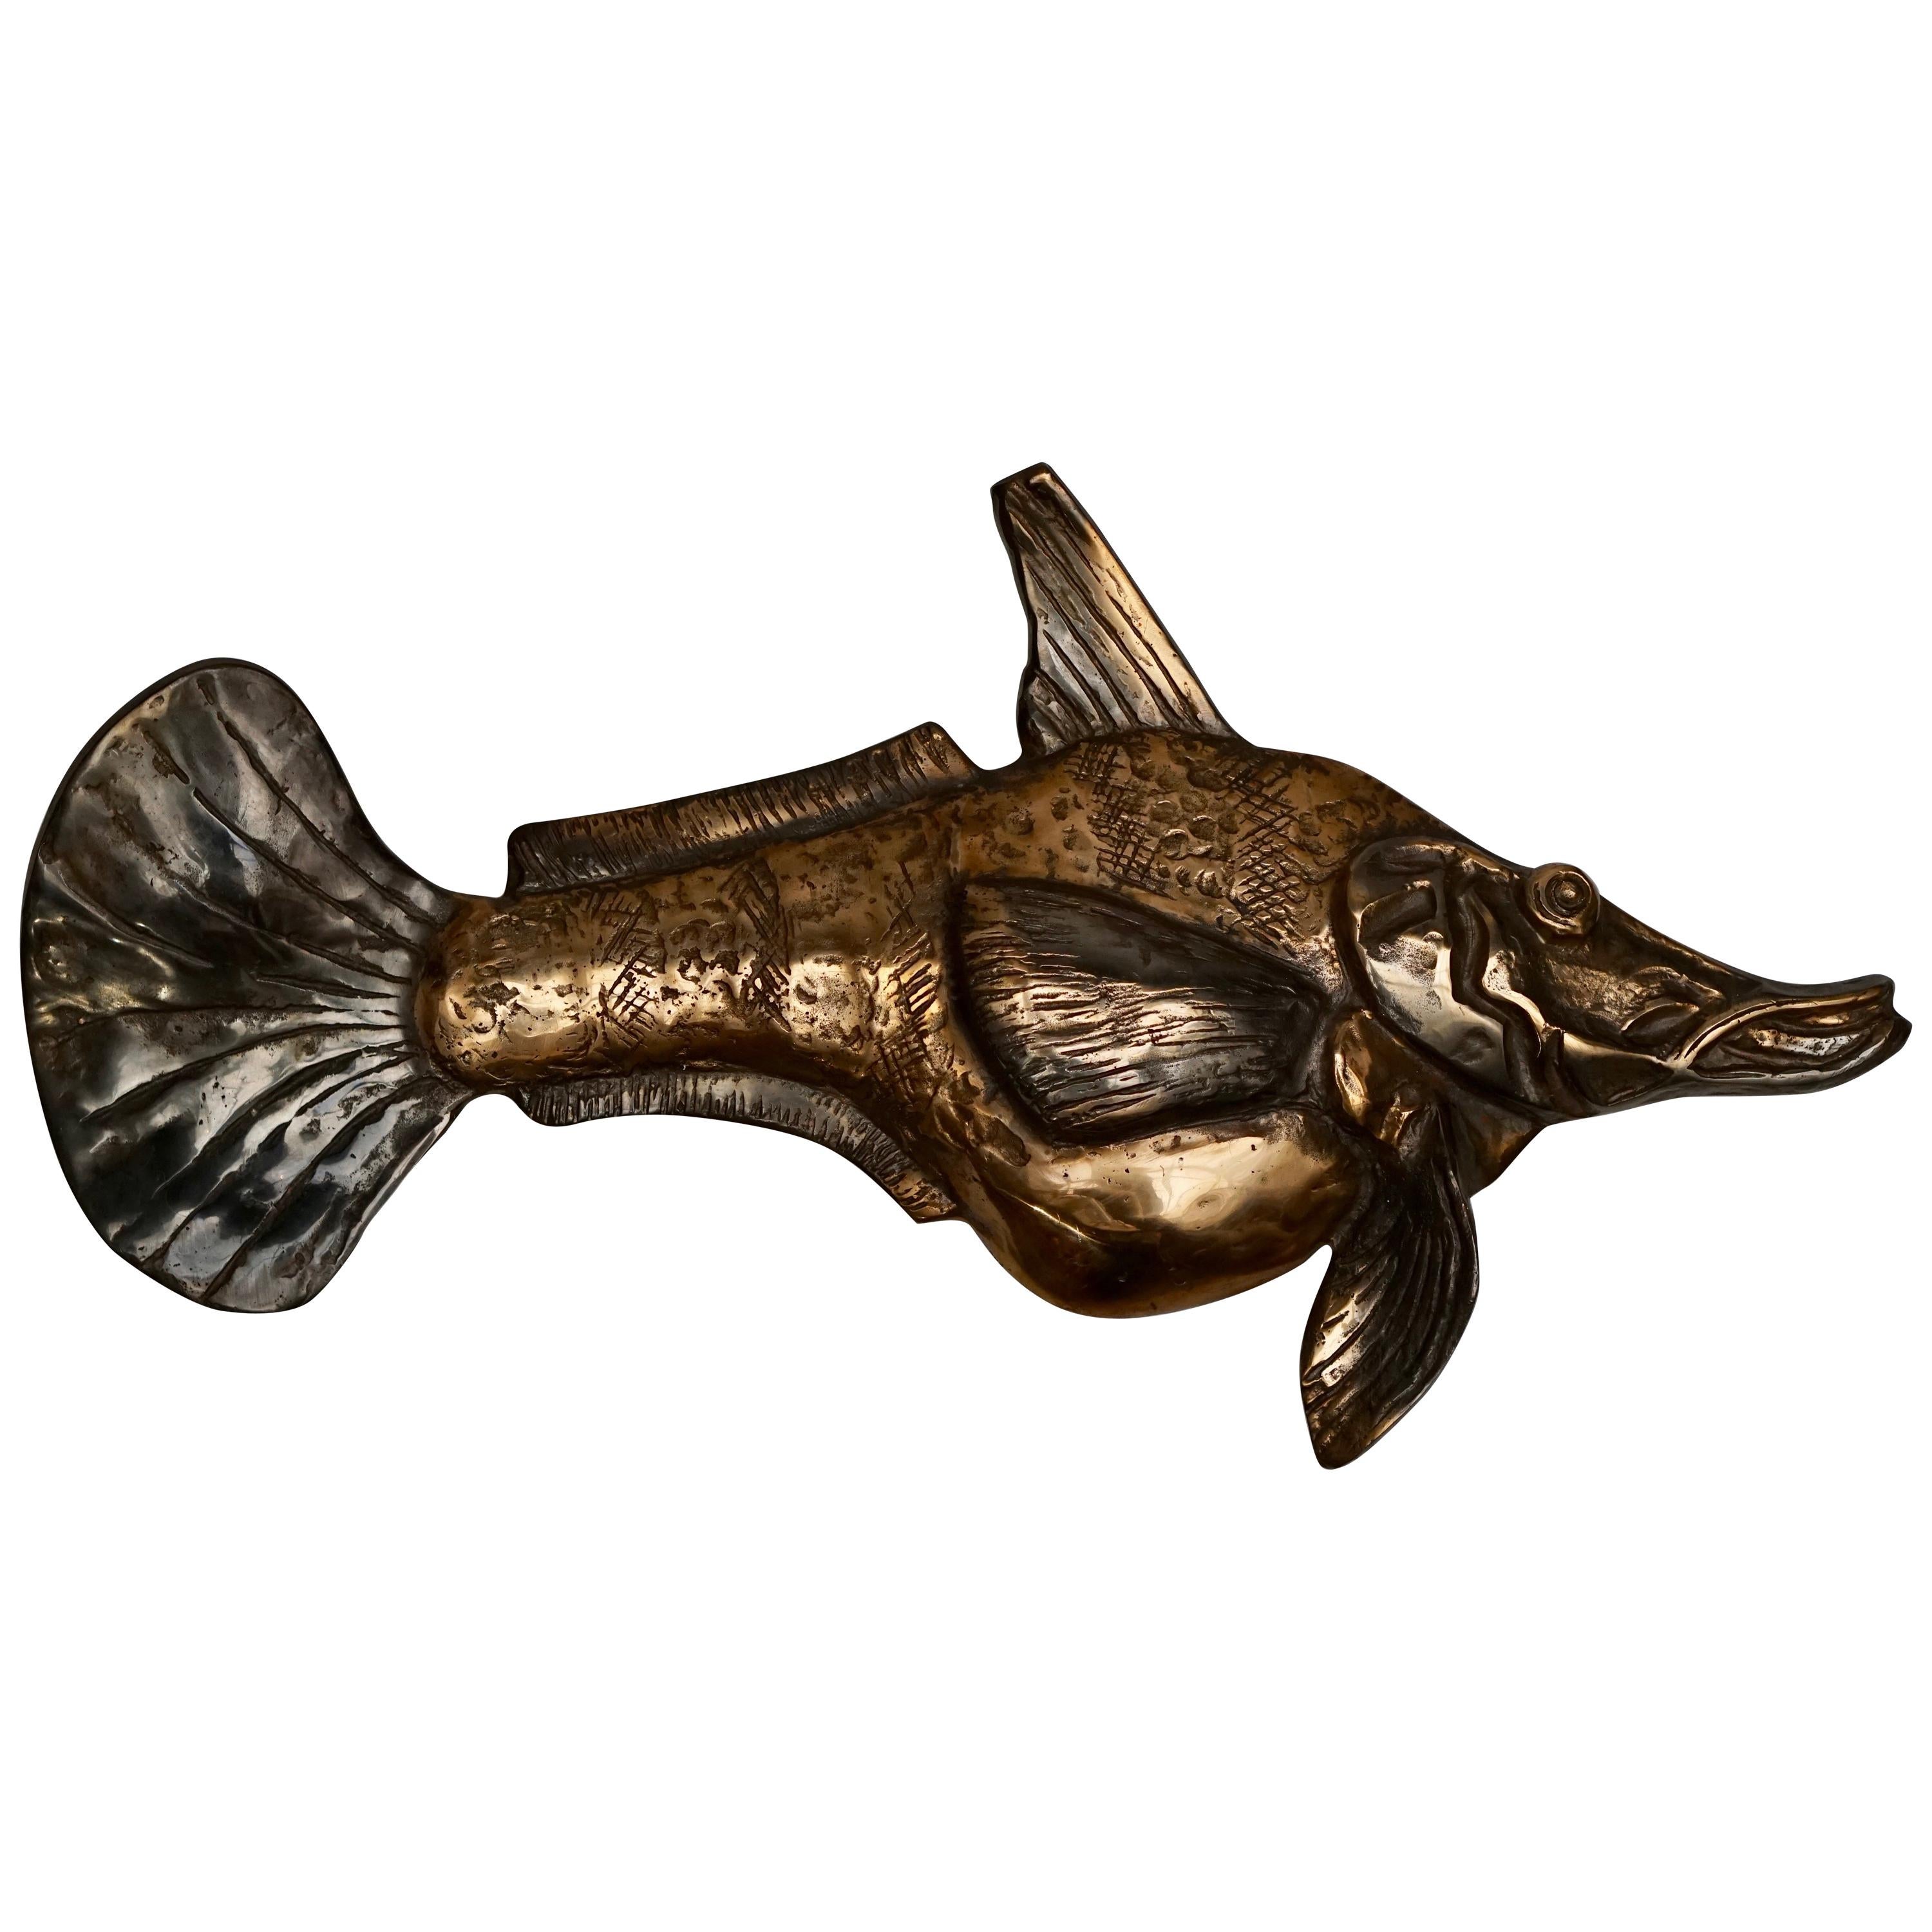 Bronze Wall Sconce Sculpture in the Shape of a Fish